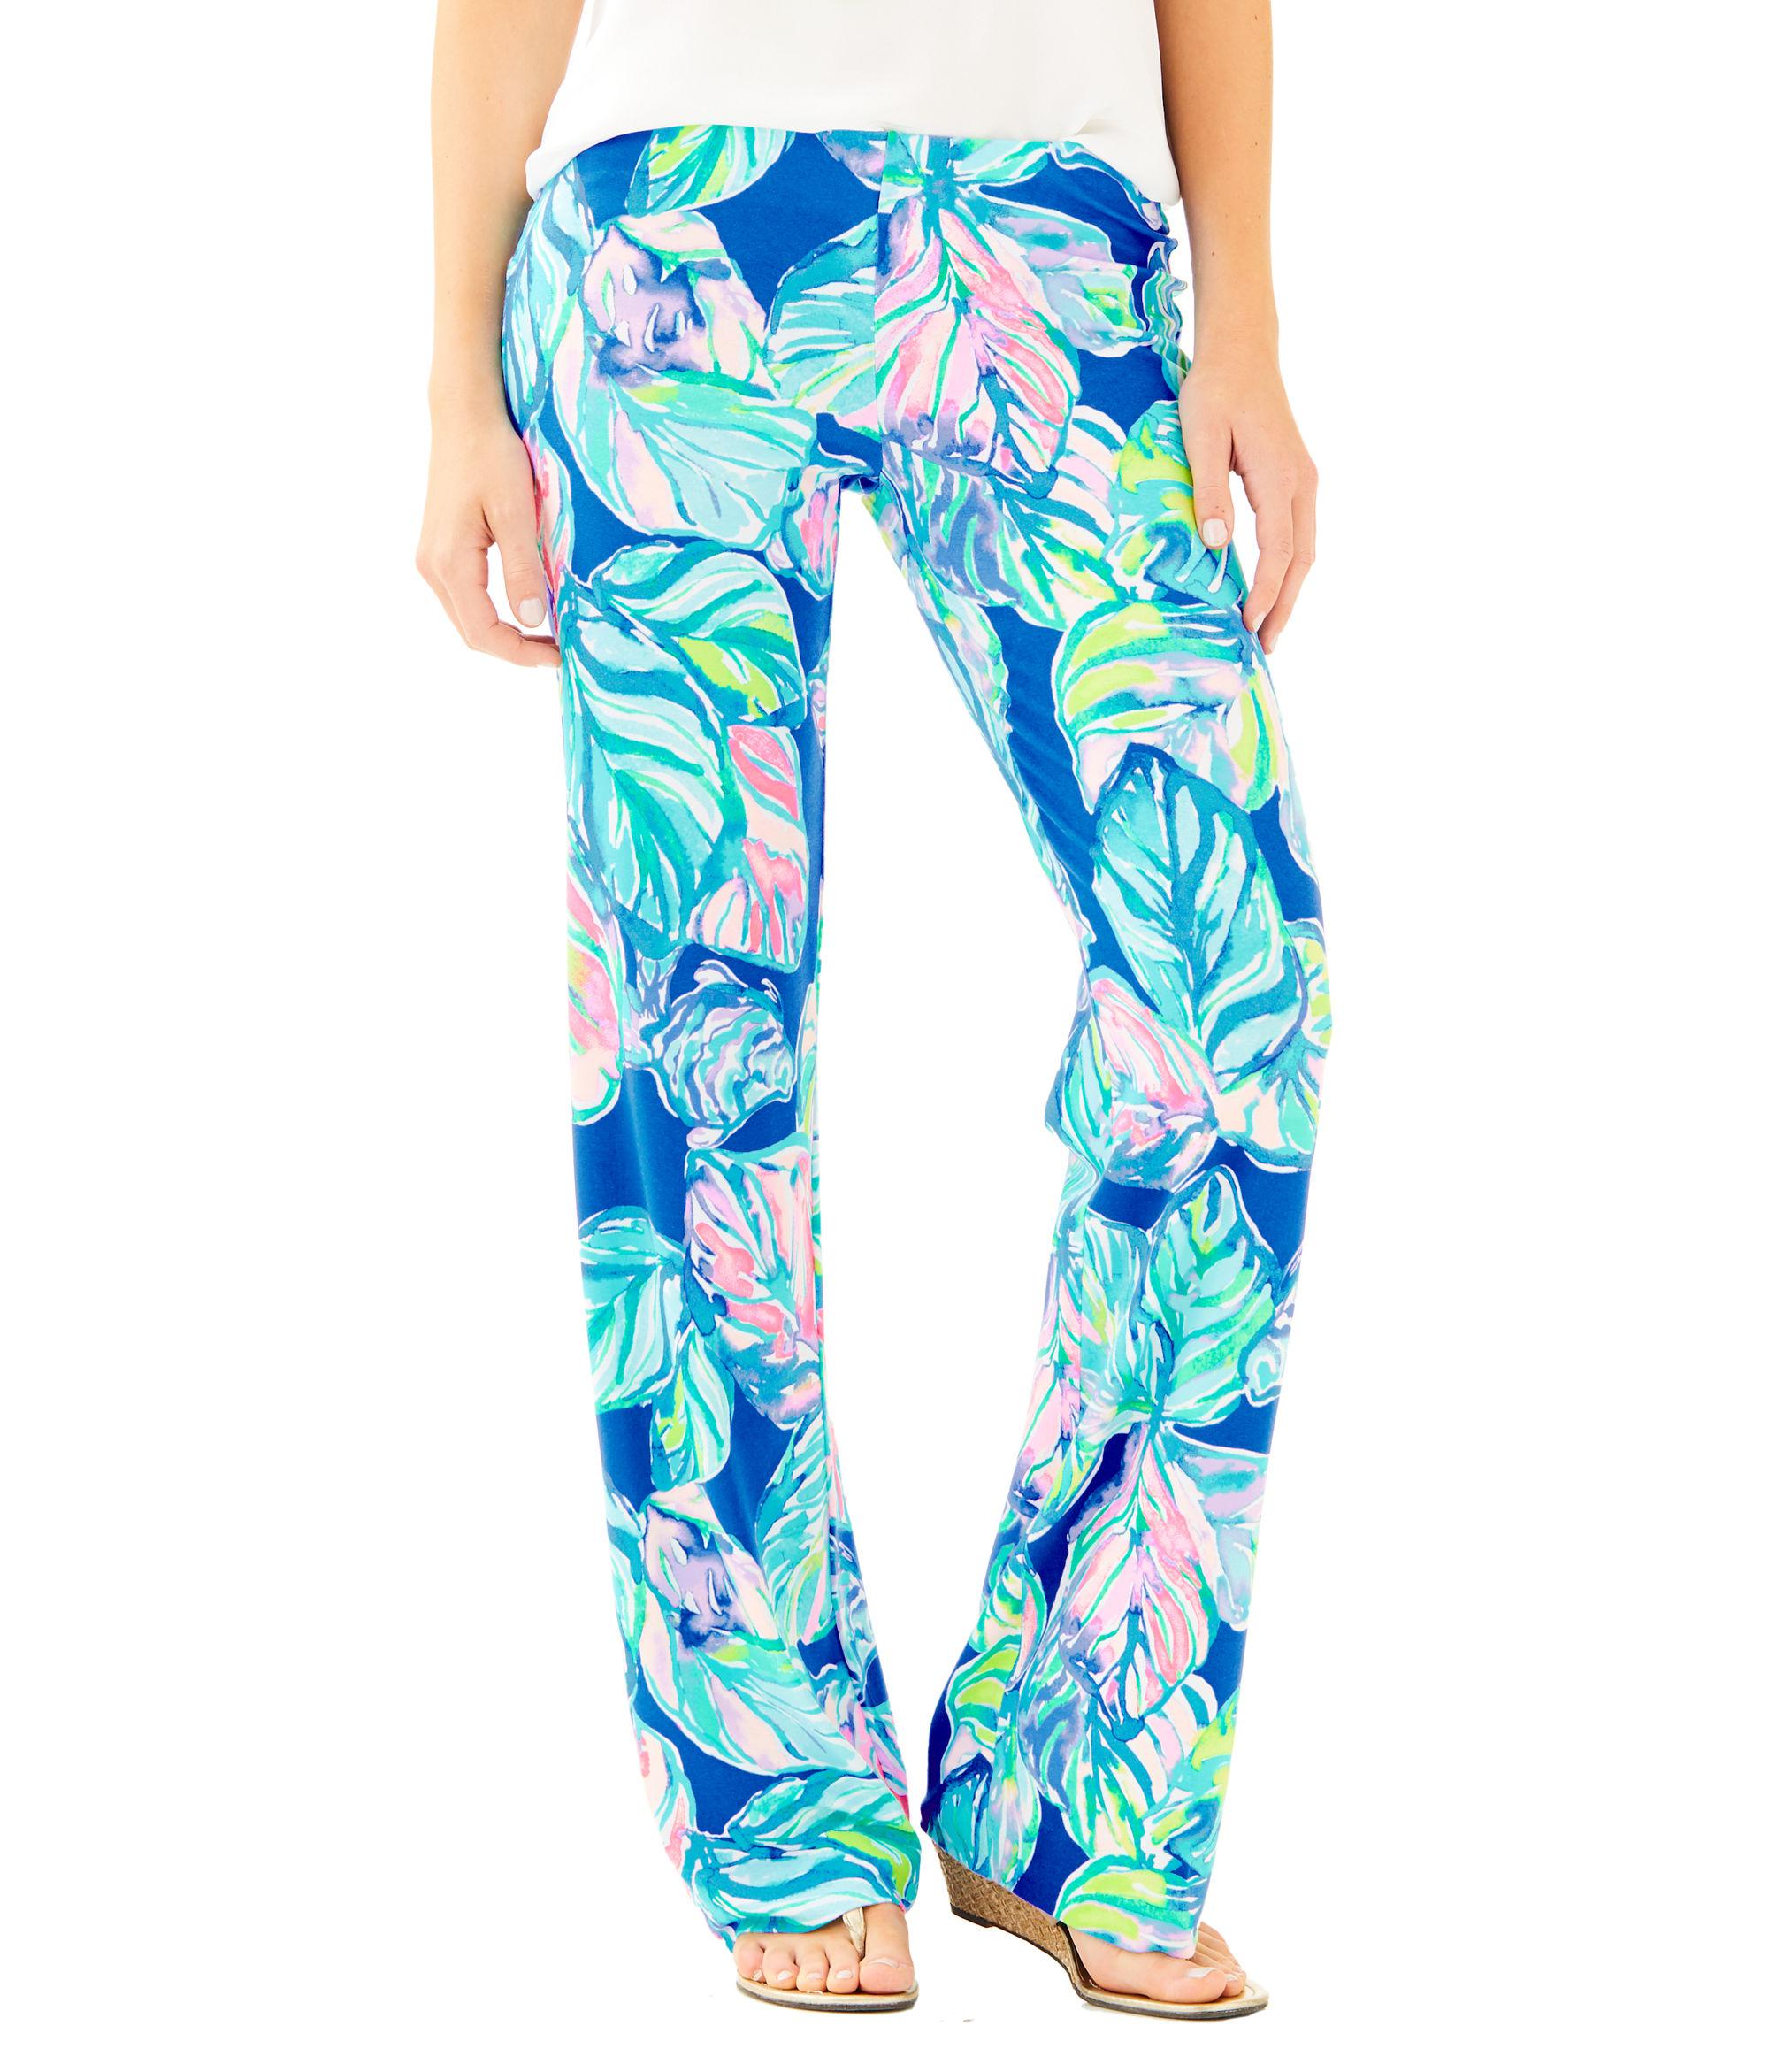 Lyst - Lilly Pulitzer 33